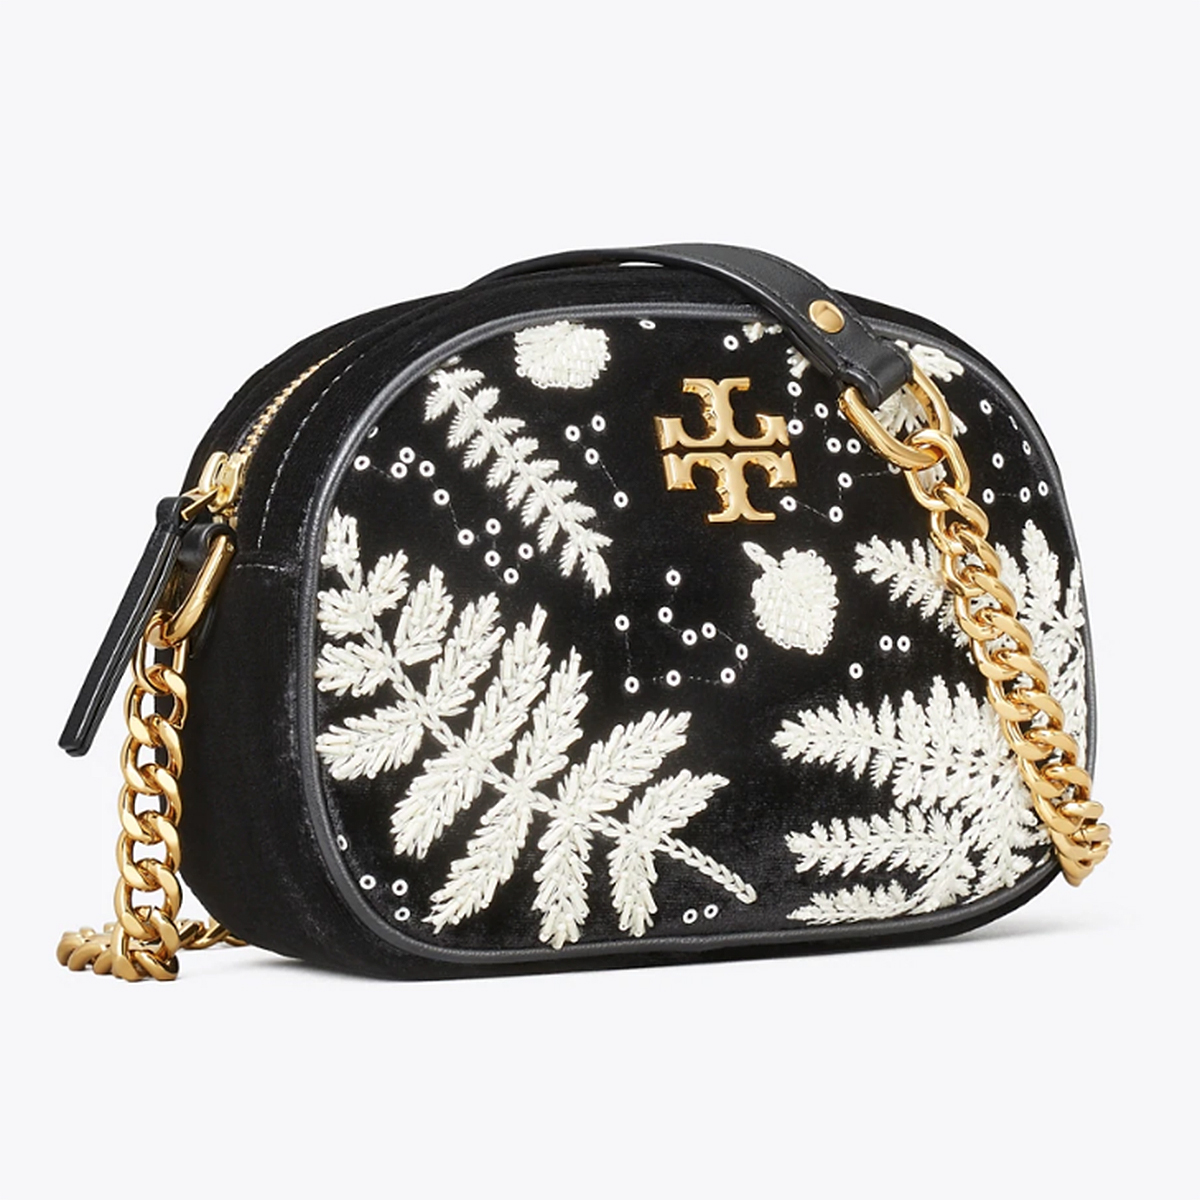 Shop the Newest Styles in the Tory Burch Sale for an Extra 25% Off ...